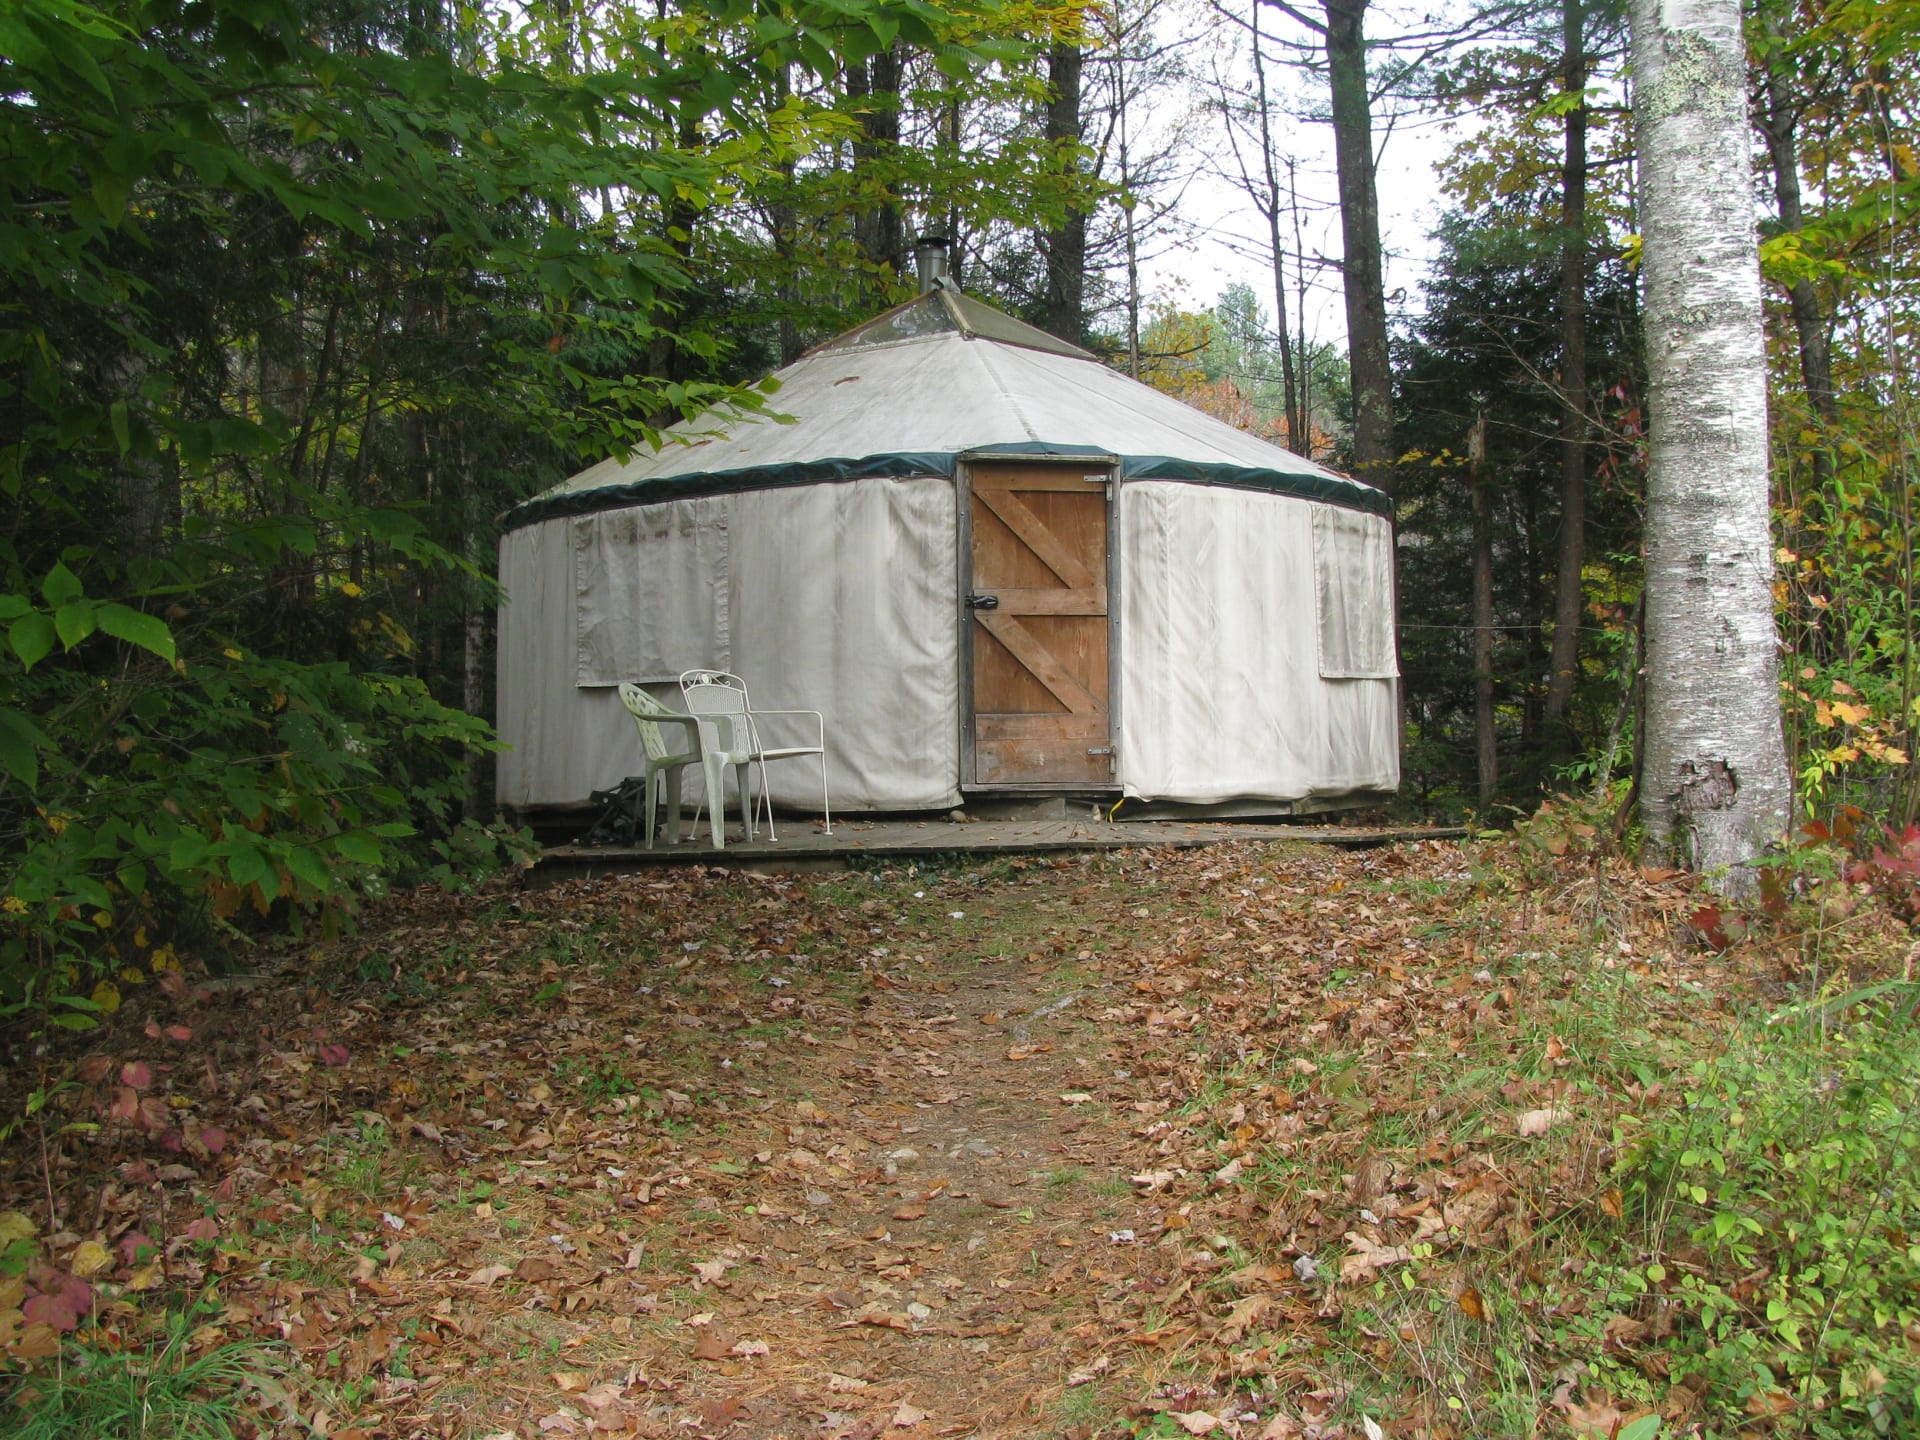 Our Yurt- 20' diameter with lots of room for you and your group or family or just for two